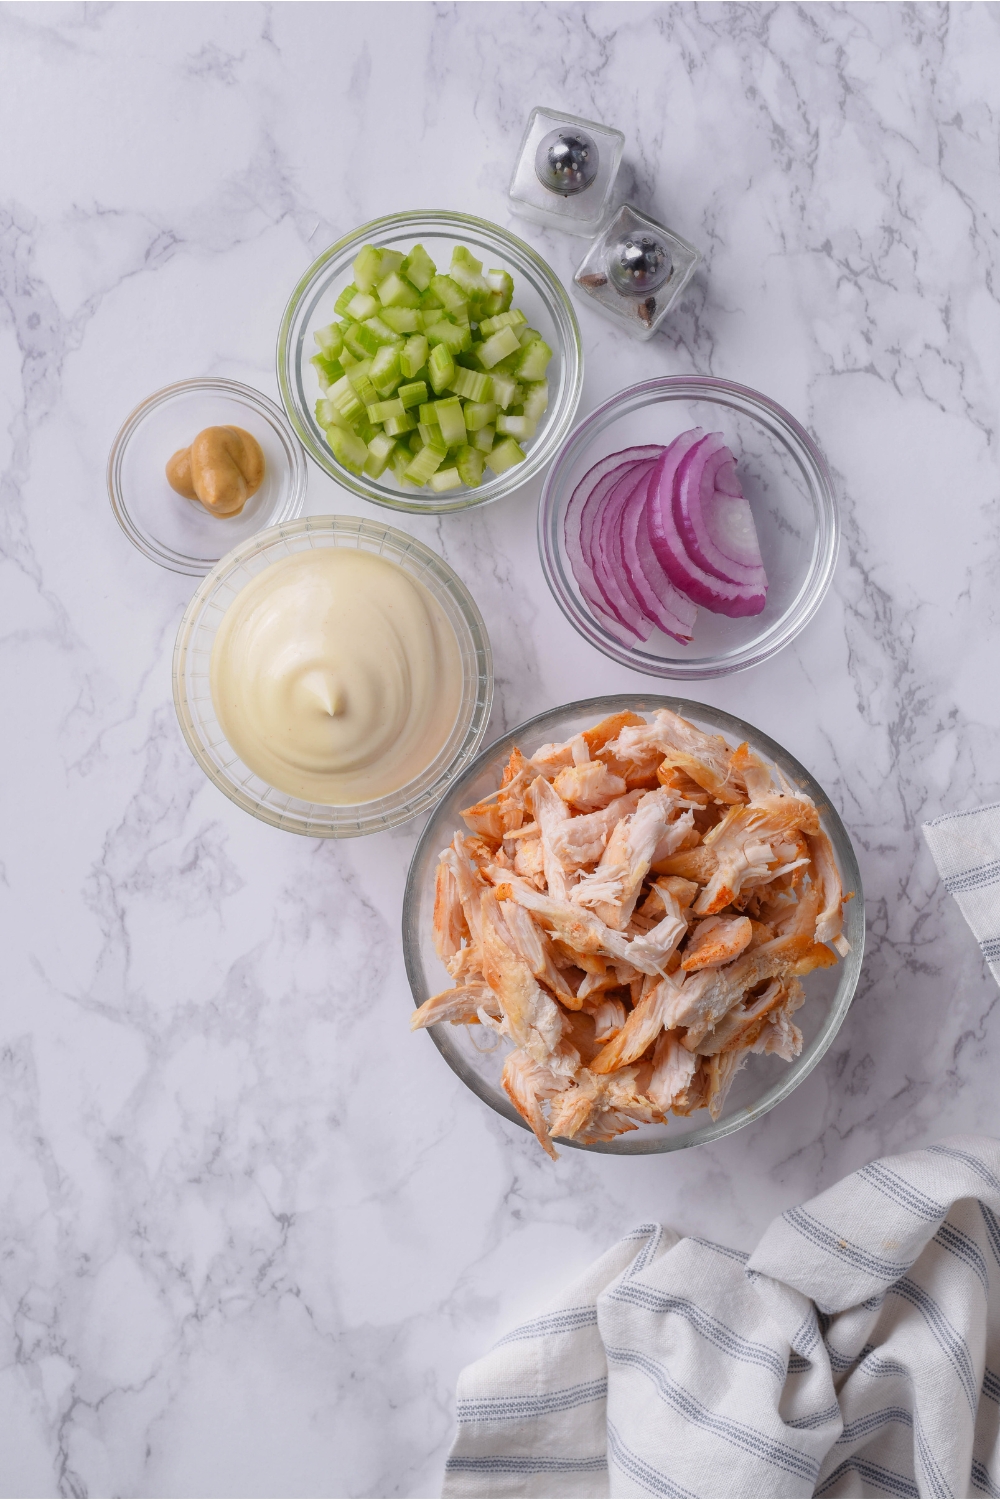 An assortment of ingredients including bowls of shredded seasoned chicken, sliced red onion, mayonnaise, mustard, diced celery, and mini salt and pepper shakers.